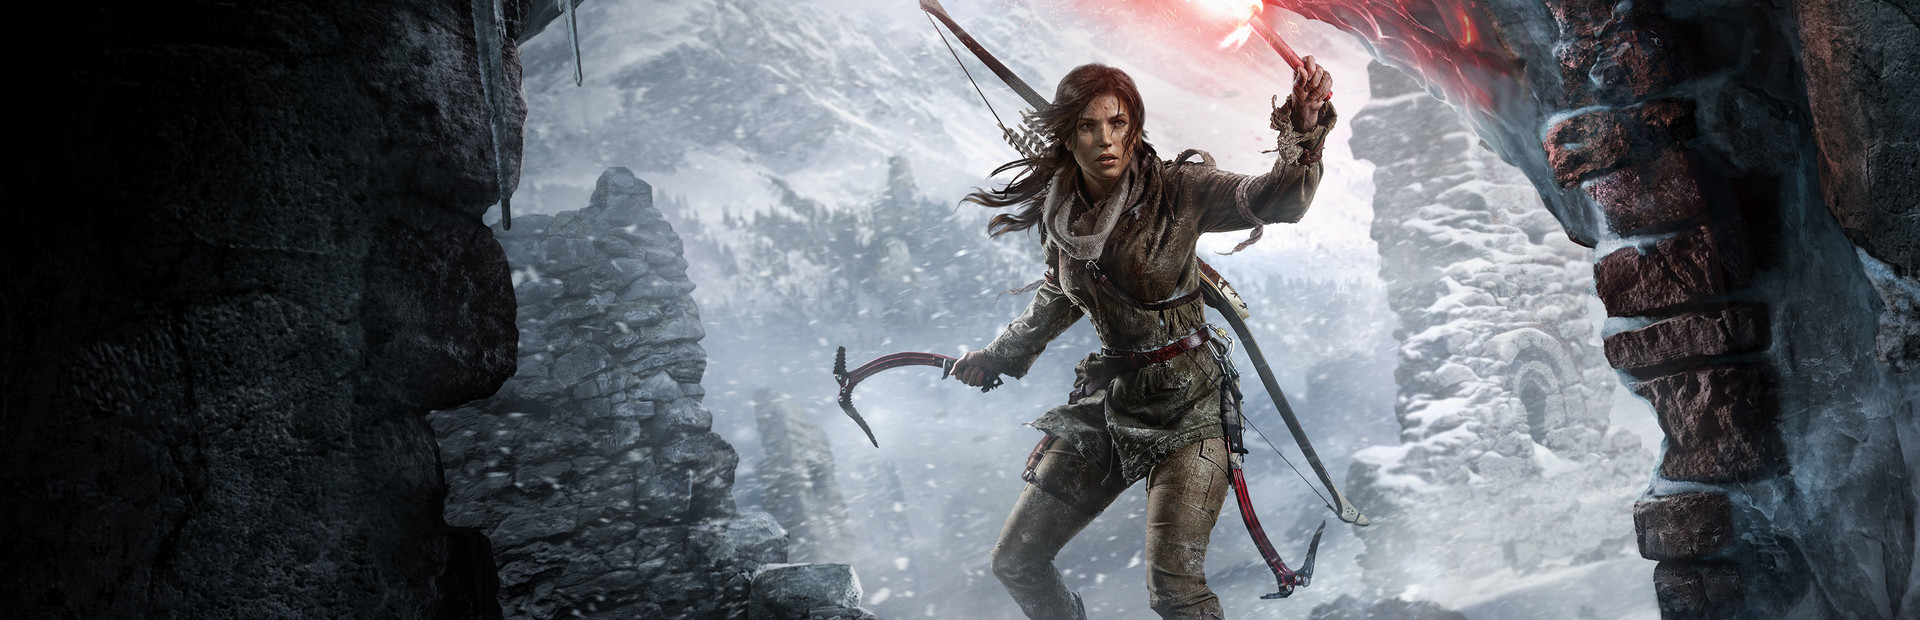 Rise of the Tomb Raider™ cover image